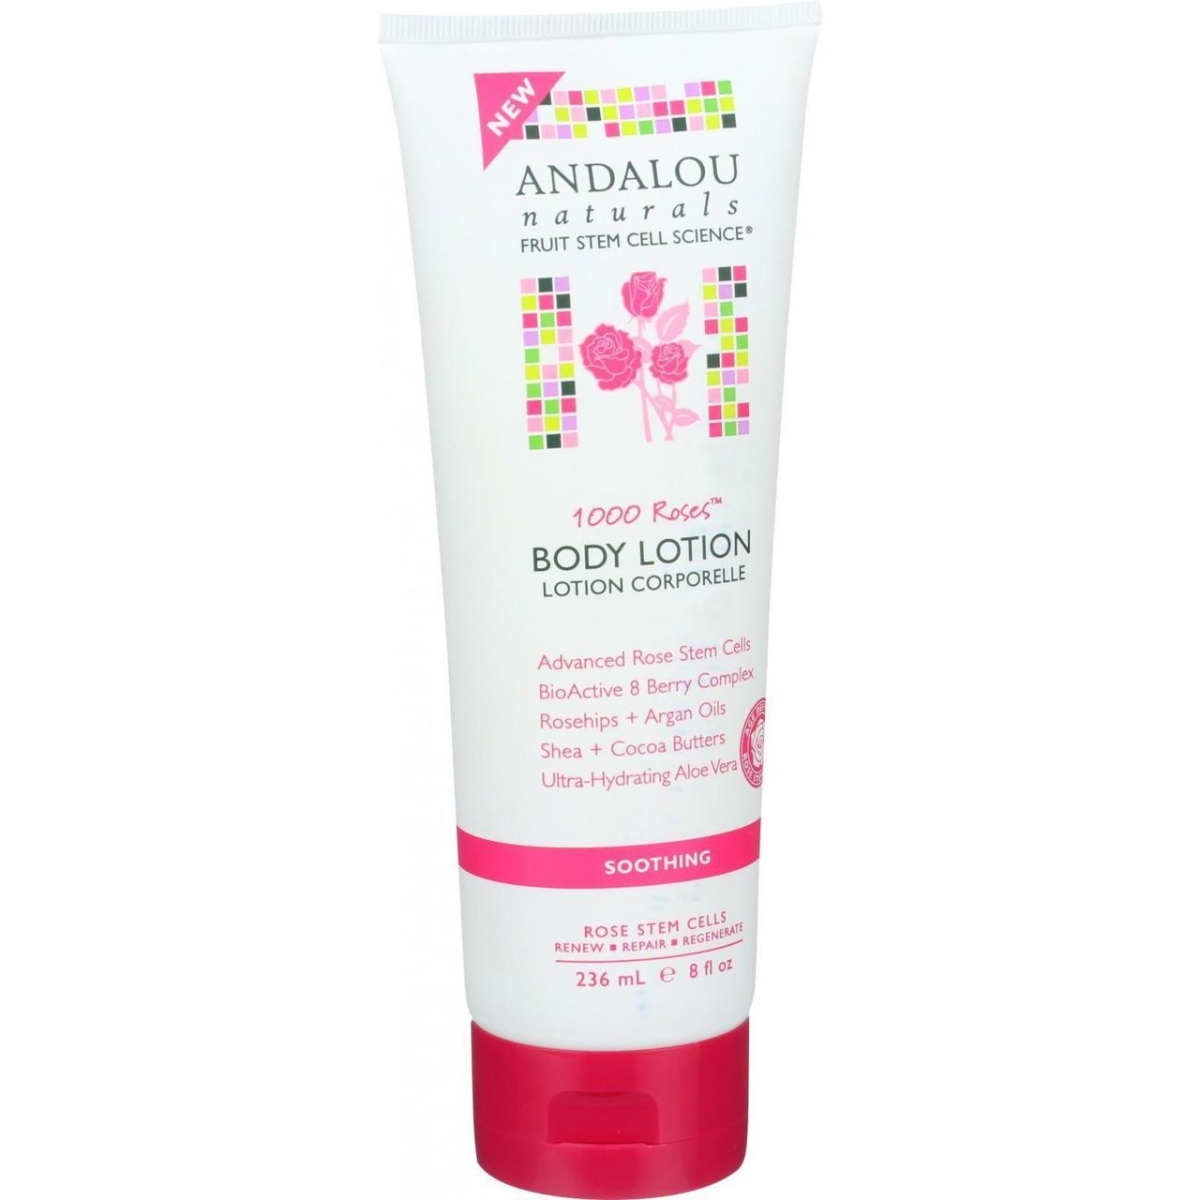 Hg1591783 8 Oz Soothing Body Lotion, 1000 Roses